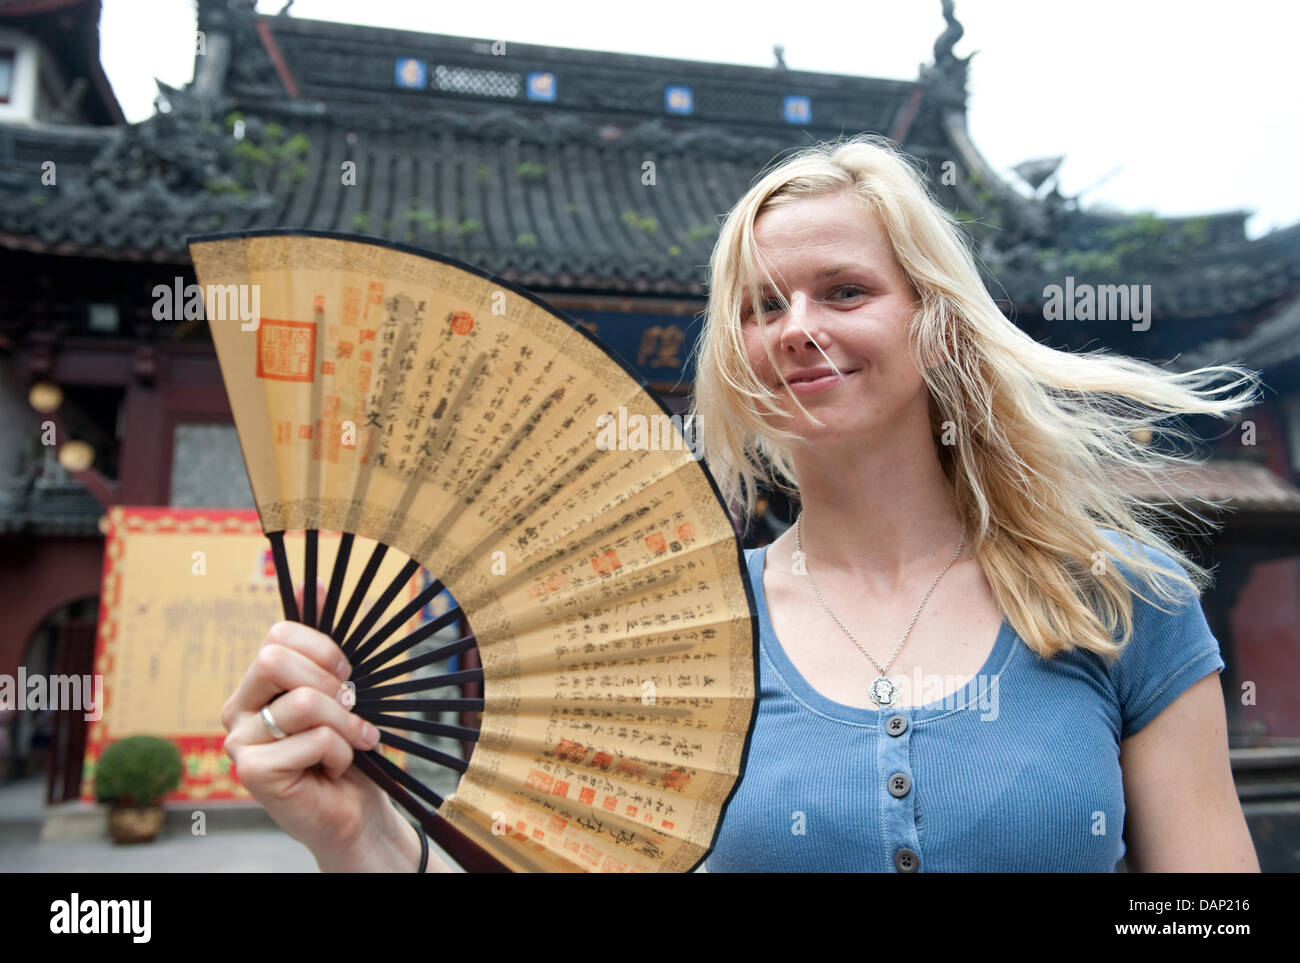 The picture made available 20 July 2011 shows German swimmer Britta Steffen flattering a fan during a visit of the Cheng Huang Miao Temple in the Yu Garden prior to the 2011 FINA World Swimming Championships in Shanghai, China, 18 July 2011. Photo: Bernd Thissen dpa Stock Photo